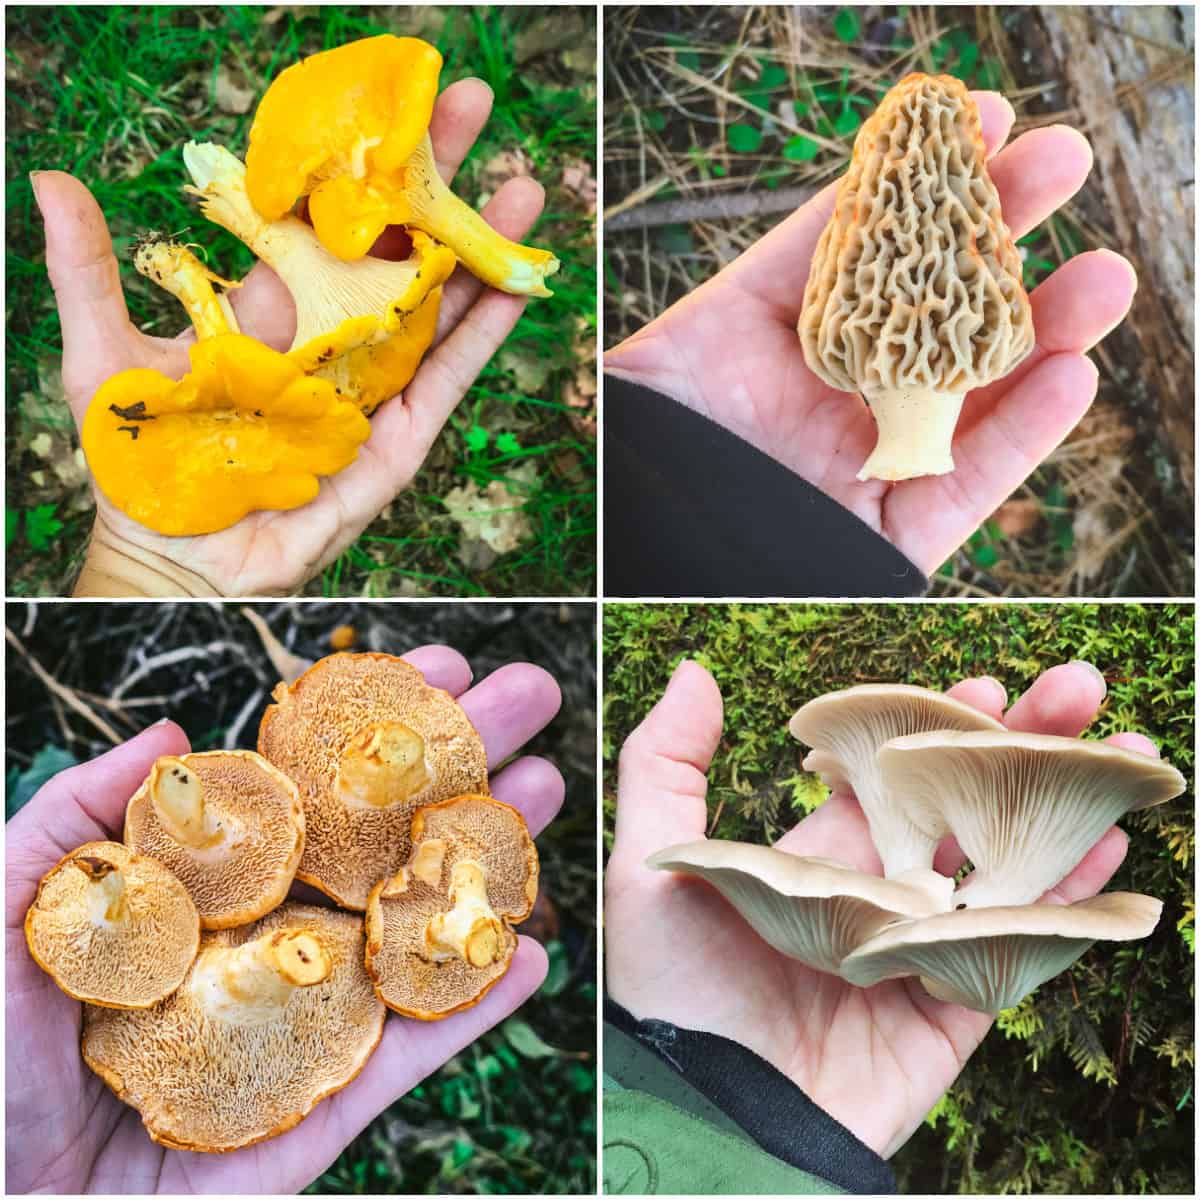 a collage of four edible wild mushrooms: chanterelle, morel, hedgehog, and oyster.